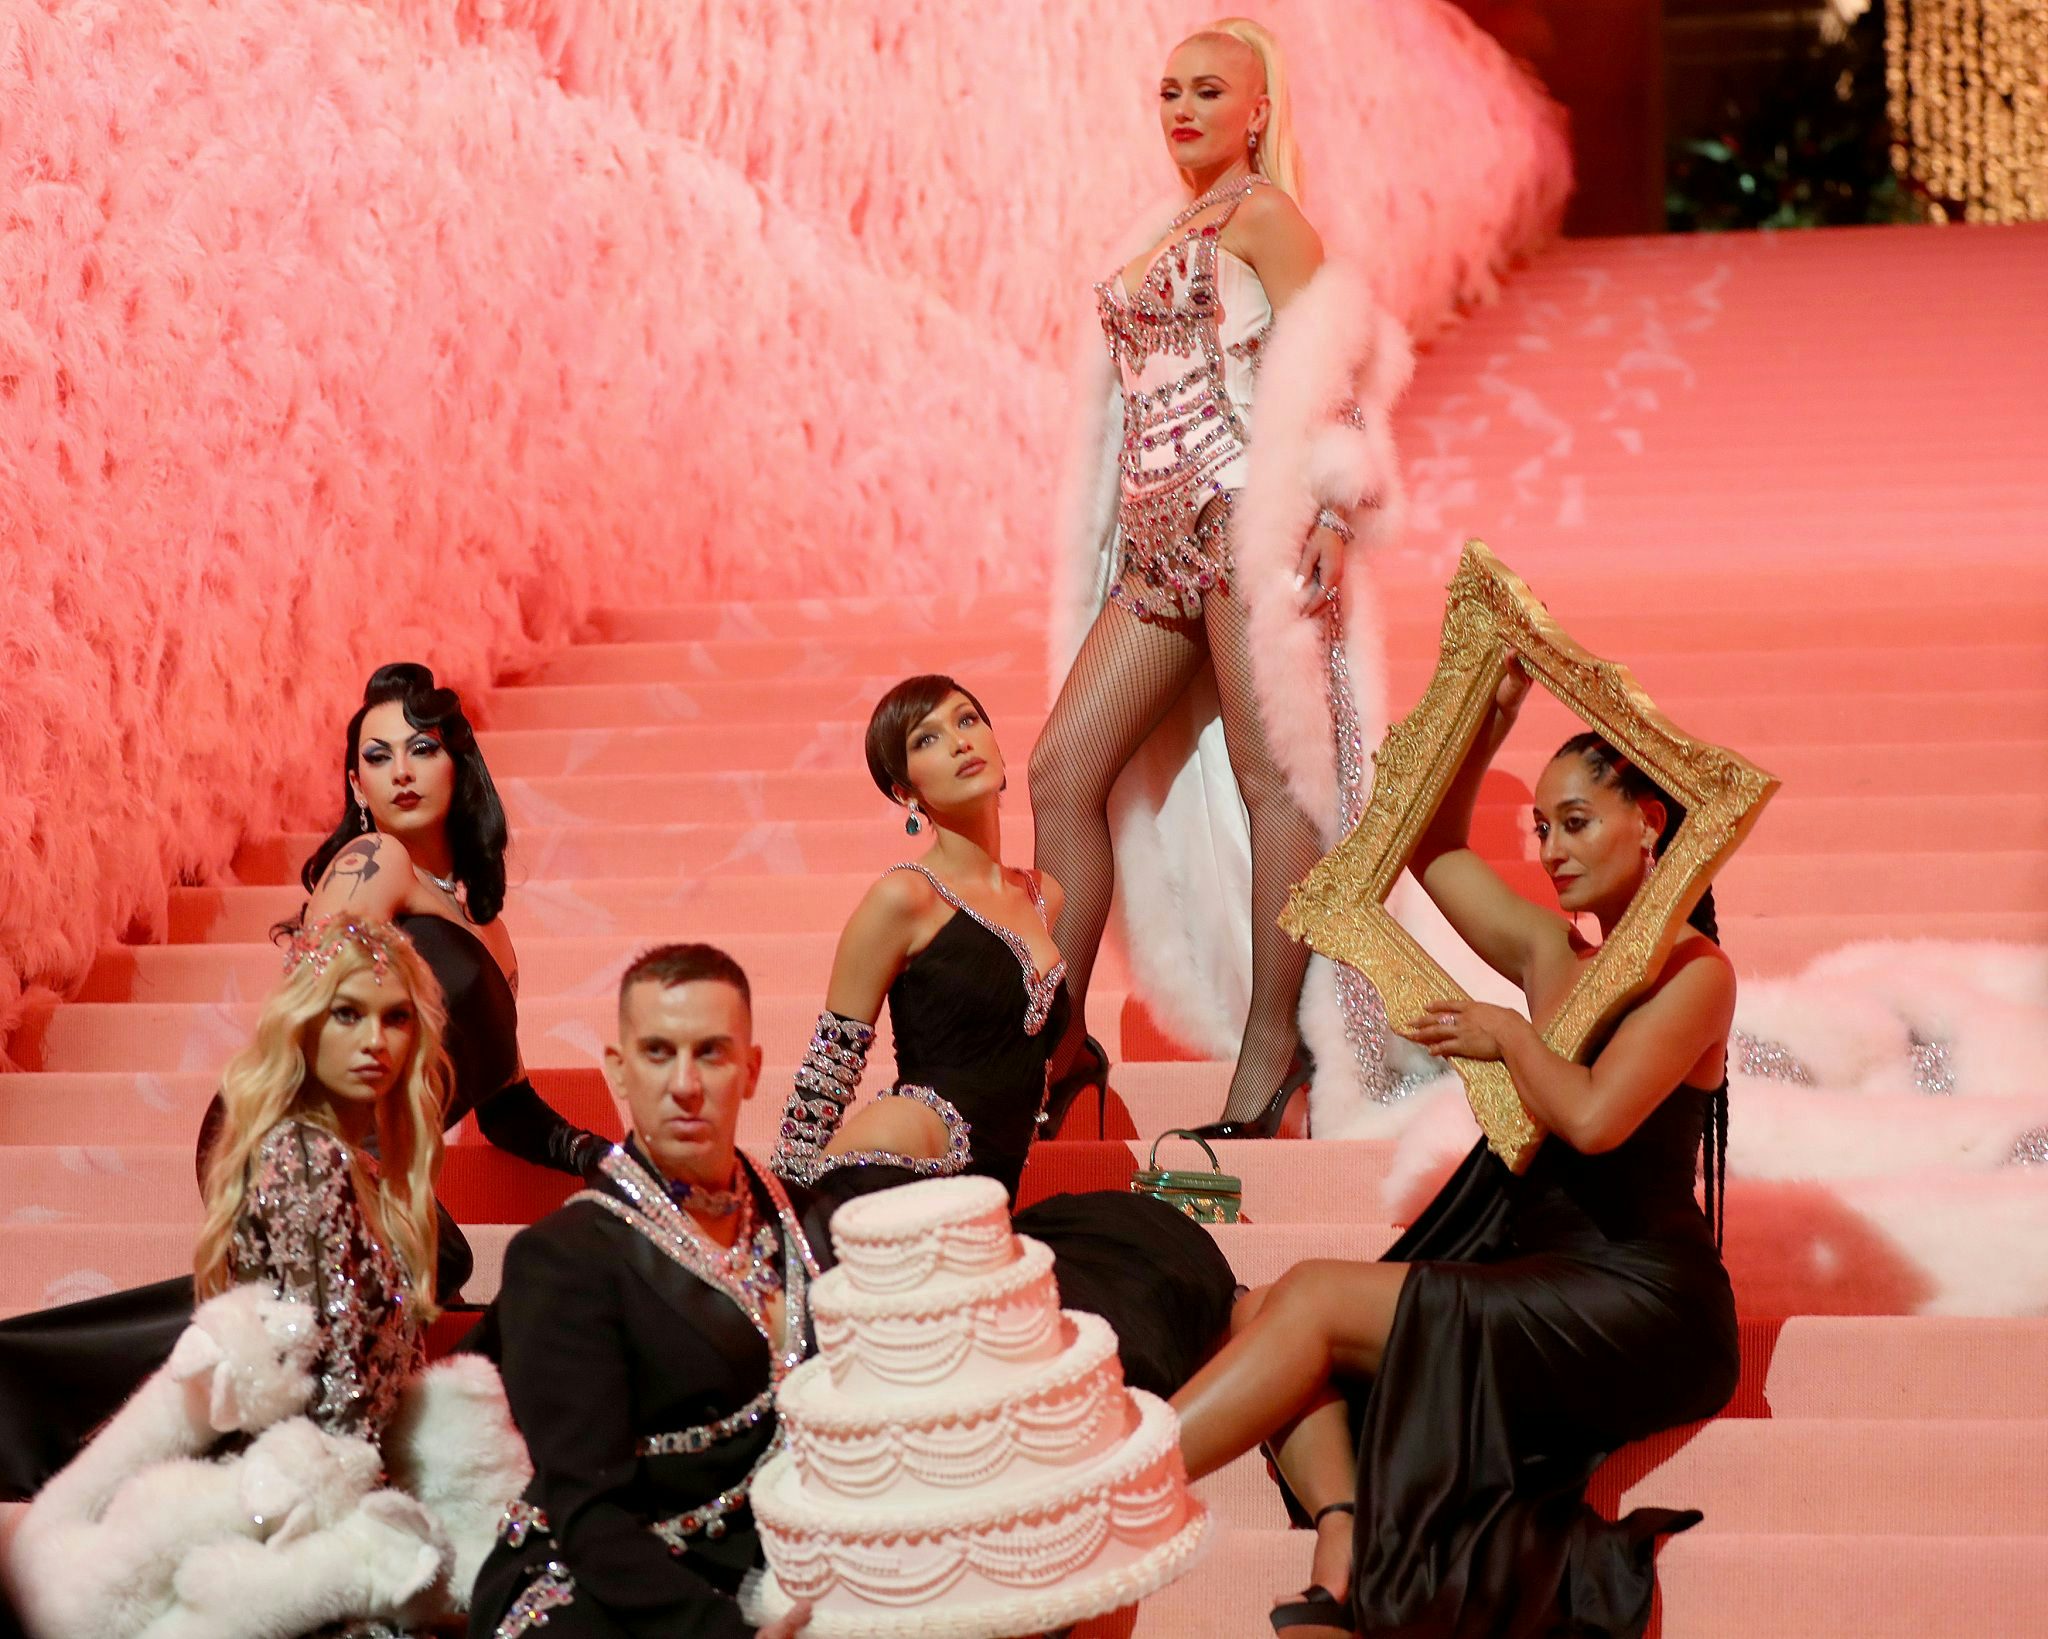 How the Met Gala Got More Than 170 Million Views in Less Than 48 Hours in China